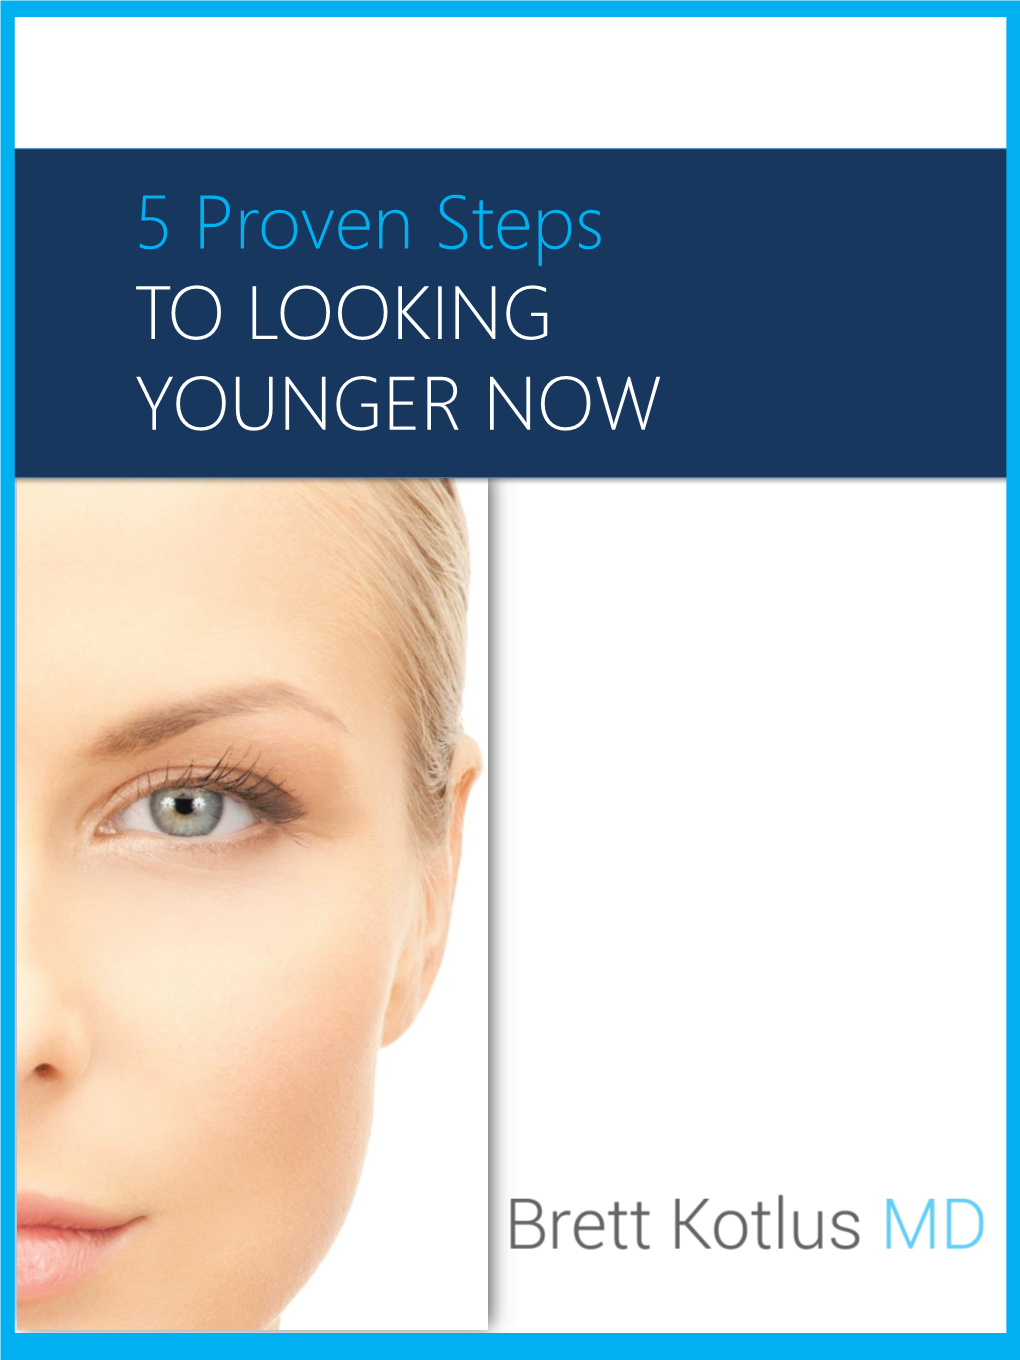 5 Proven Steps to LOOKING YOUNGER NOW TABLE of CONTENTS